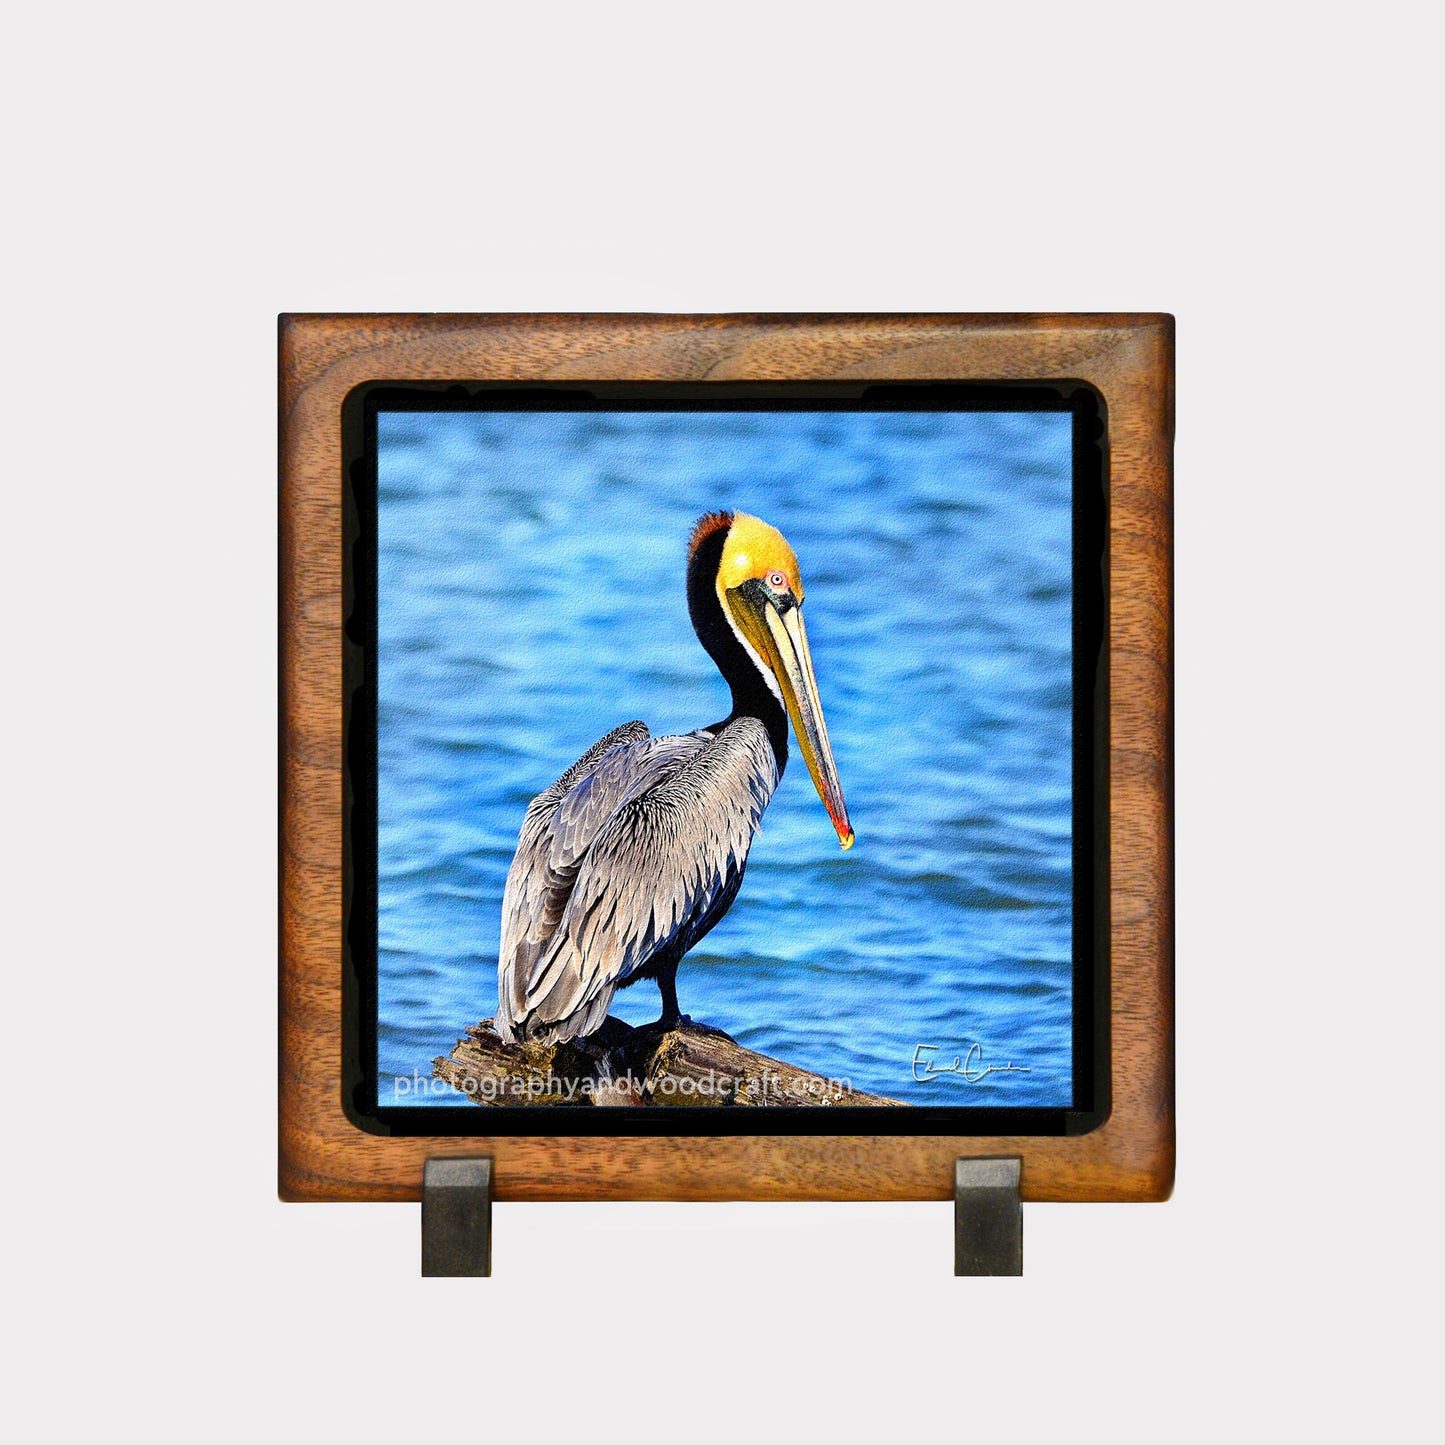 5" x 5" Pelican. Canvas Print in Solid Wood Floating Frame